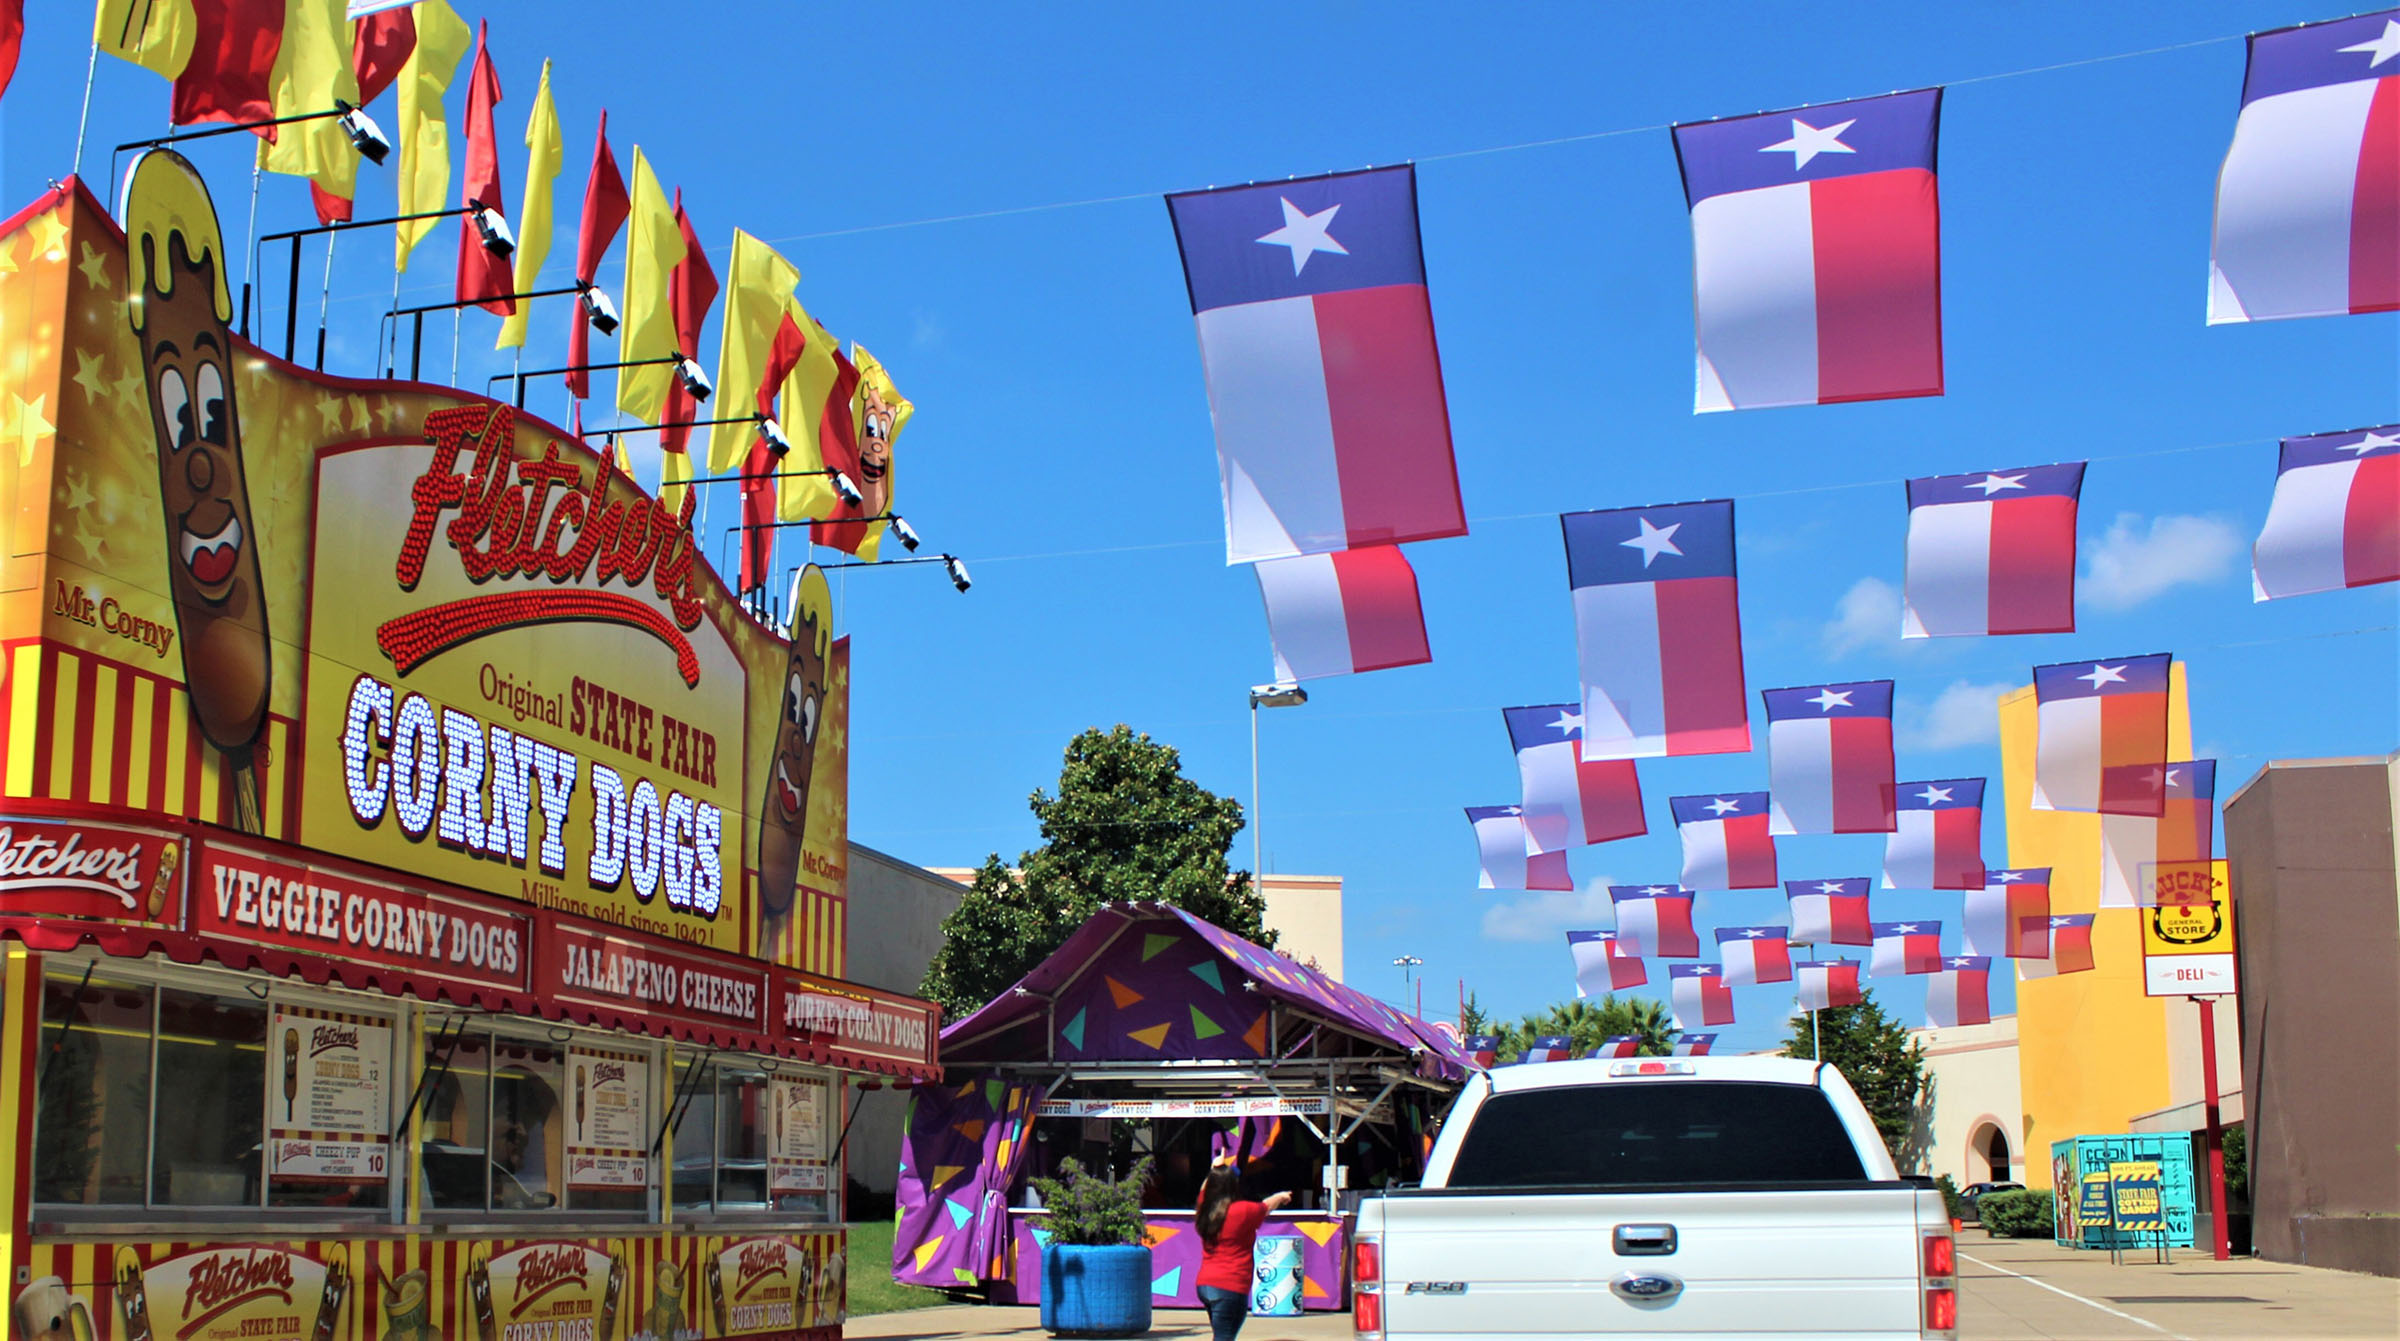 Texas flags fly above a line of cars next to Fletchers State Fair Corny Dogs stand